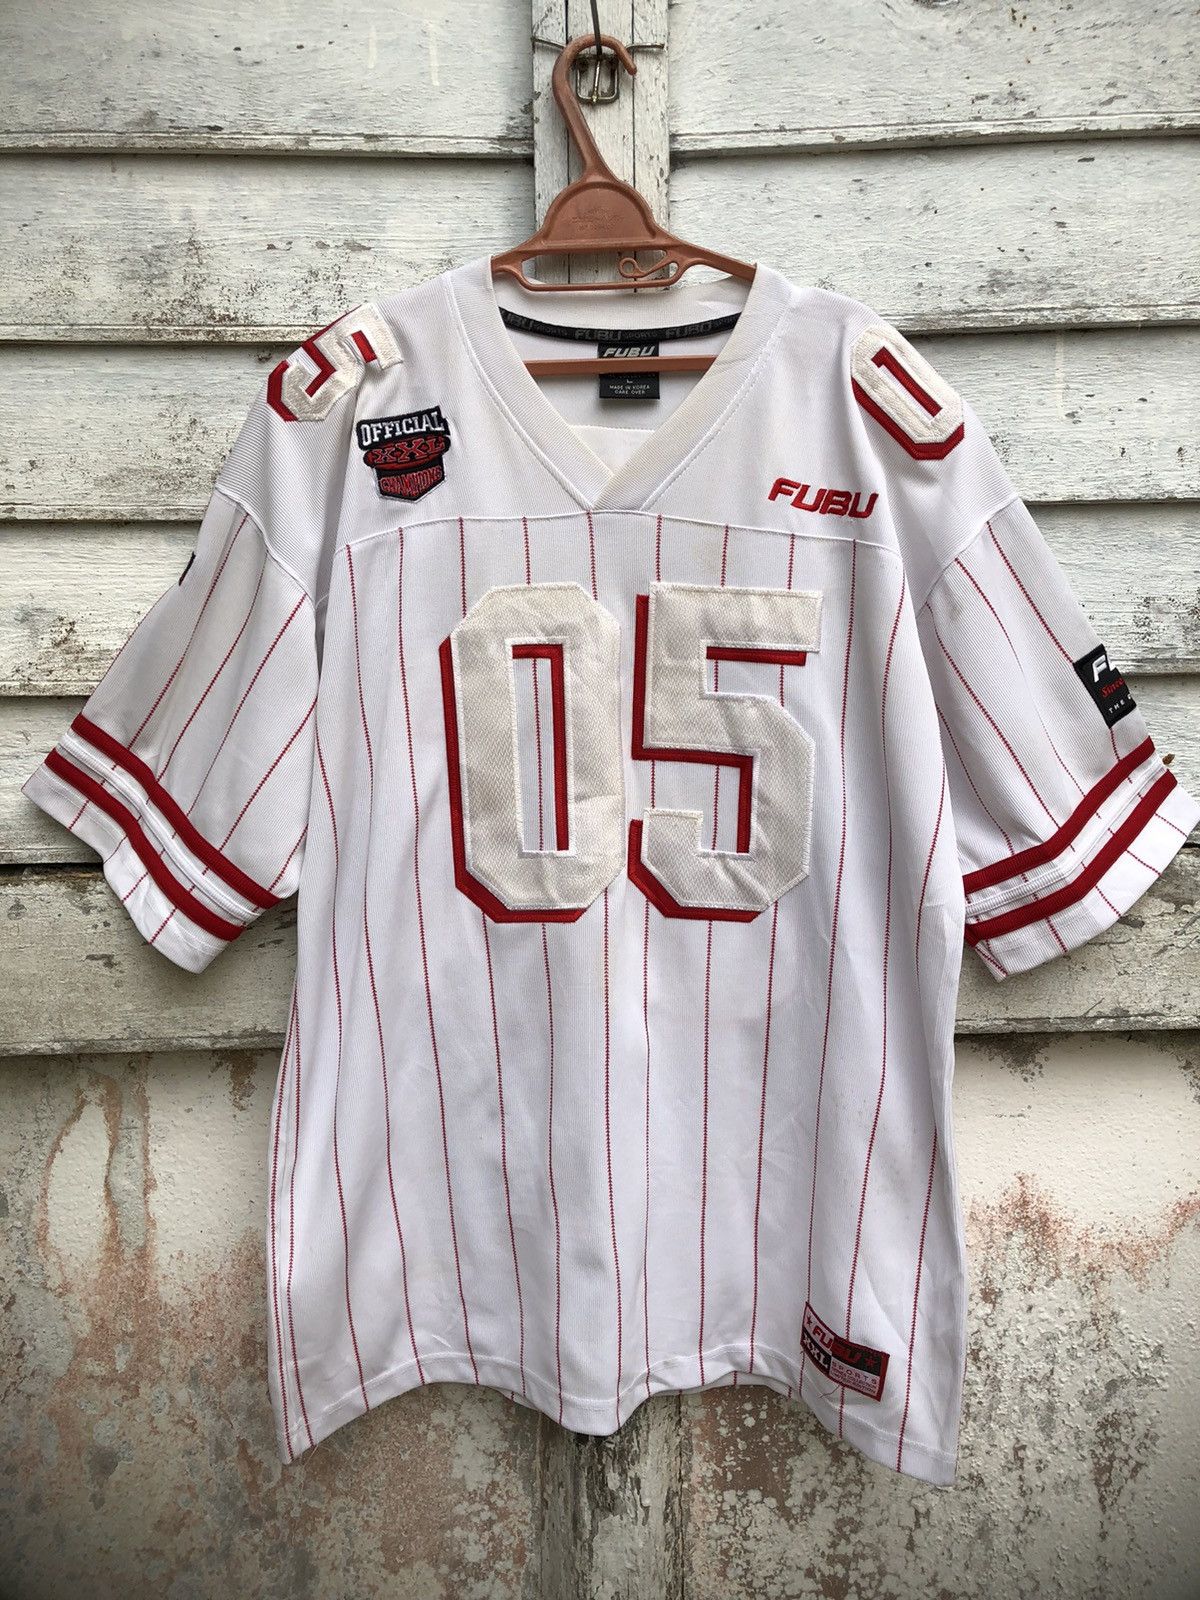 Vintage Limited Fubu 05 Rare Jersey Collection - 2